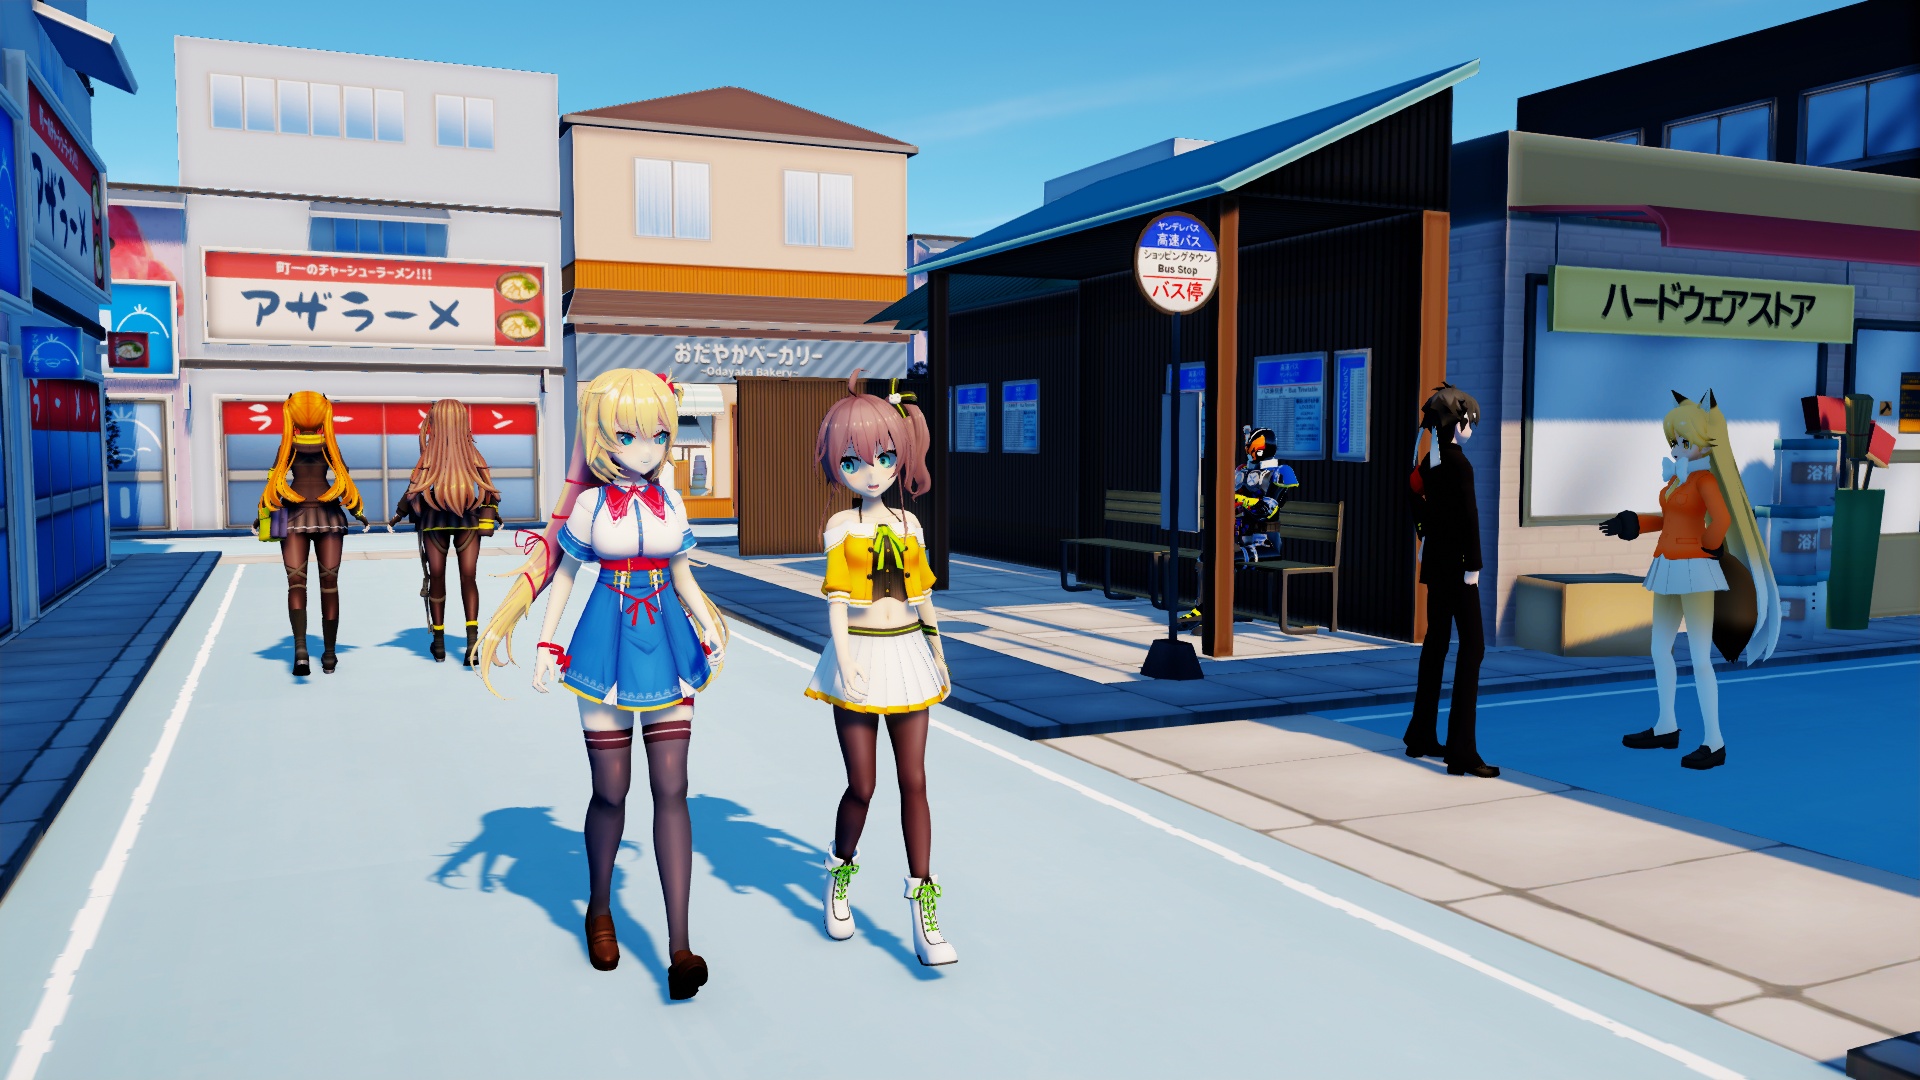 MMD Pikamee and Tomoshika (GTA) Style by Mist-To-Zero on DeviantArt